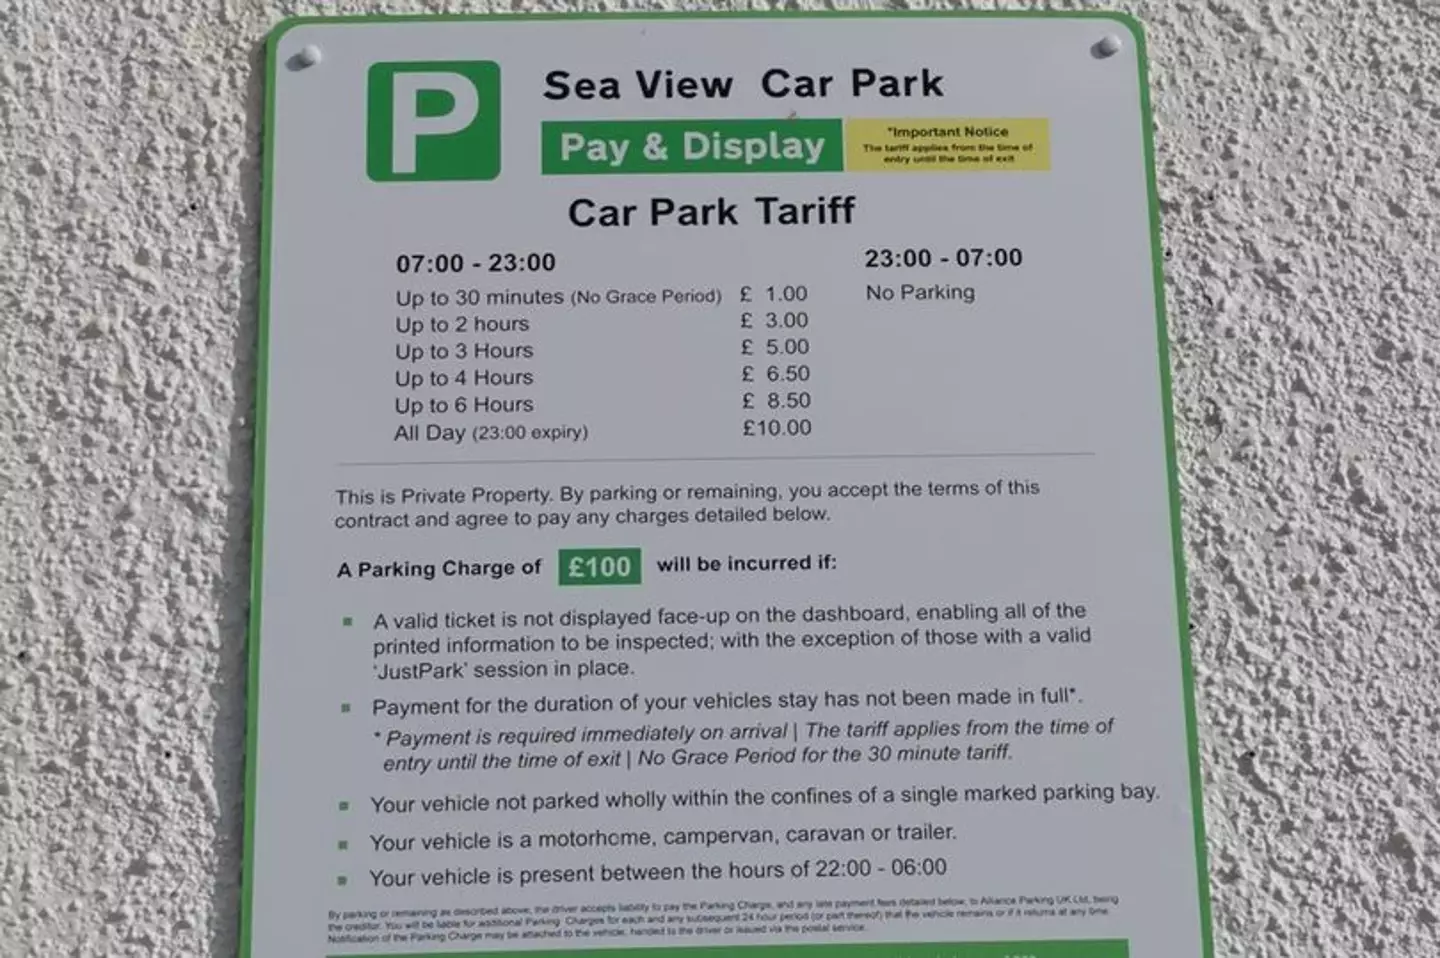 Locals have been left confused by the car park's new rules.